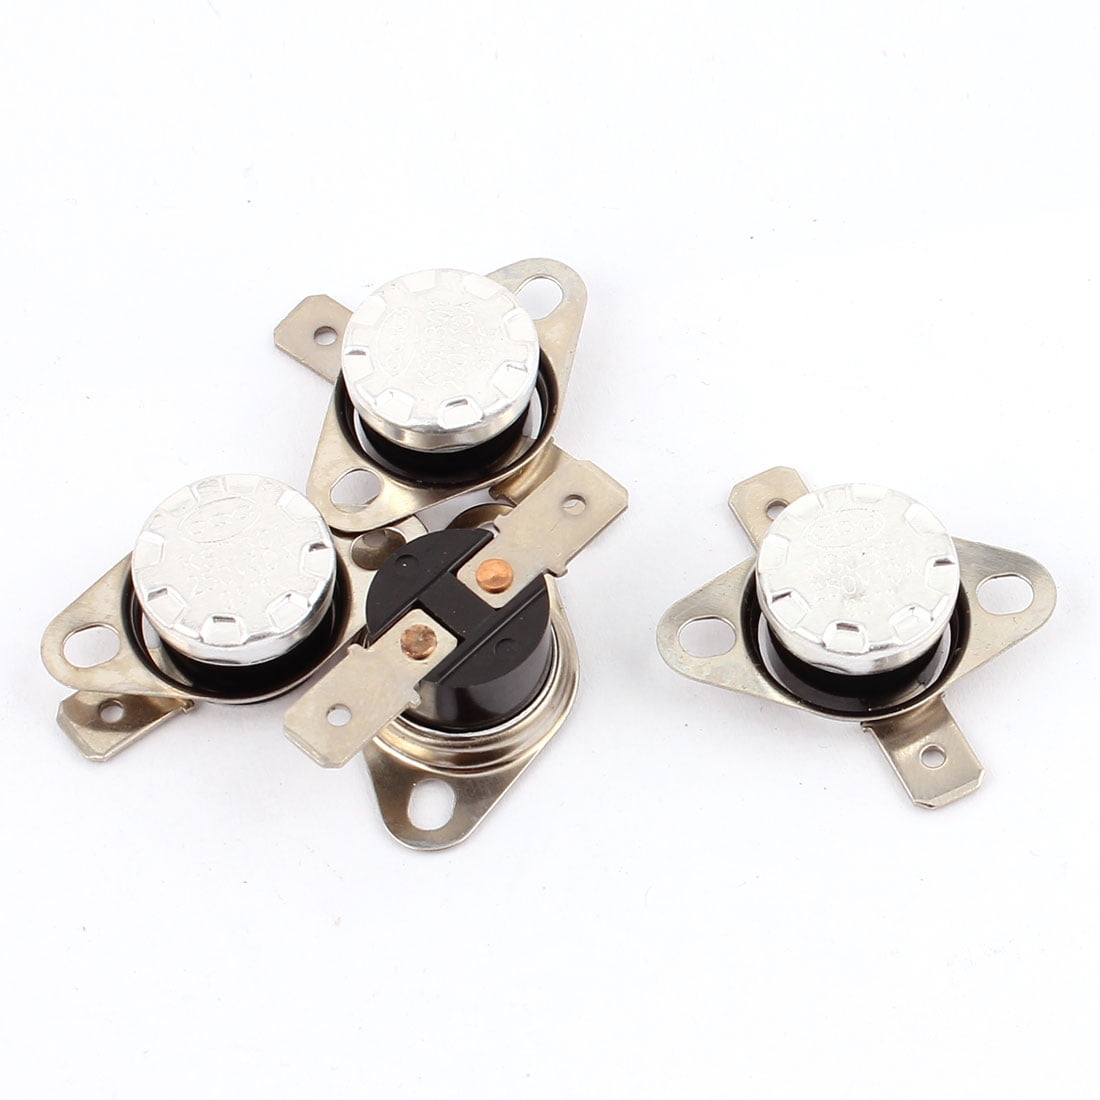 3 Pieces N/C 90ºC 194ºF normally closed Thermal  Thermostat switch KSD301 C26 